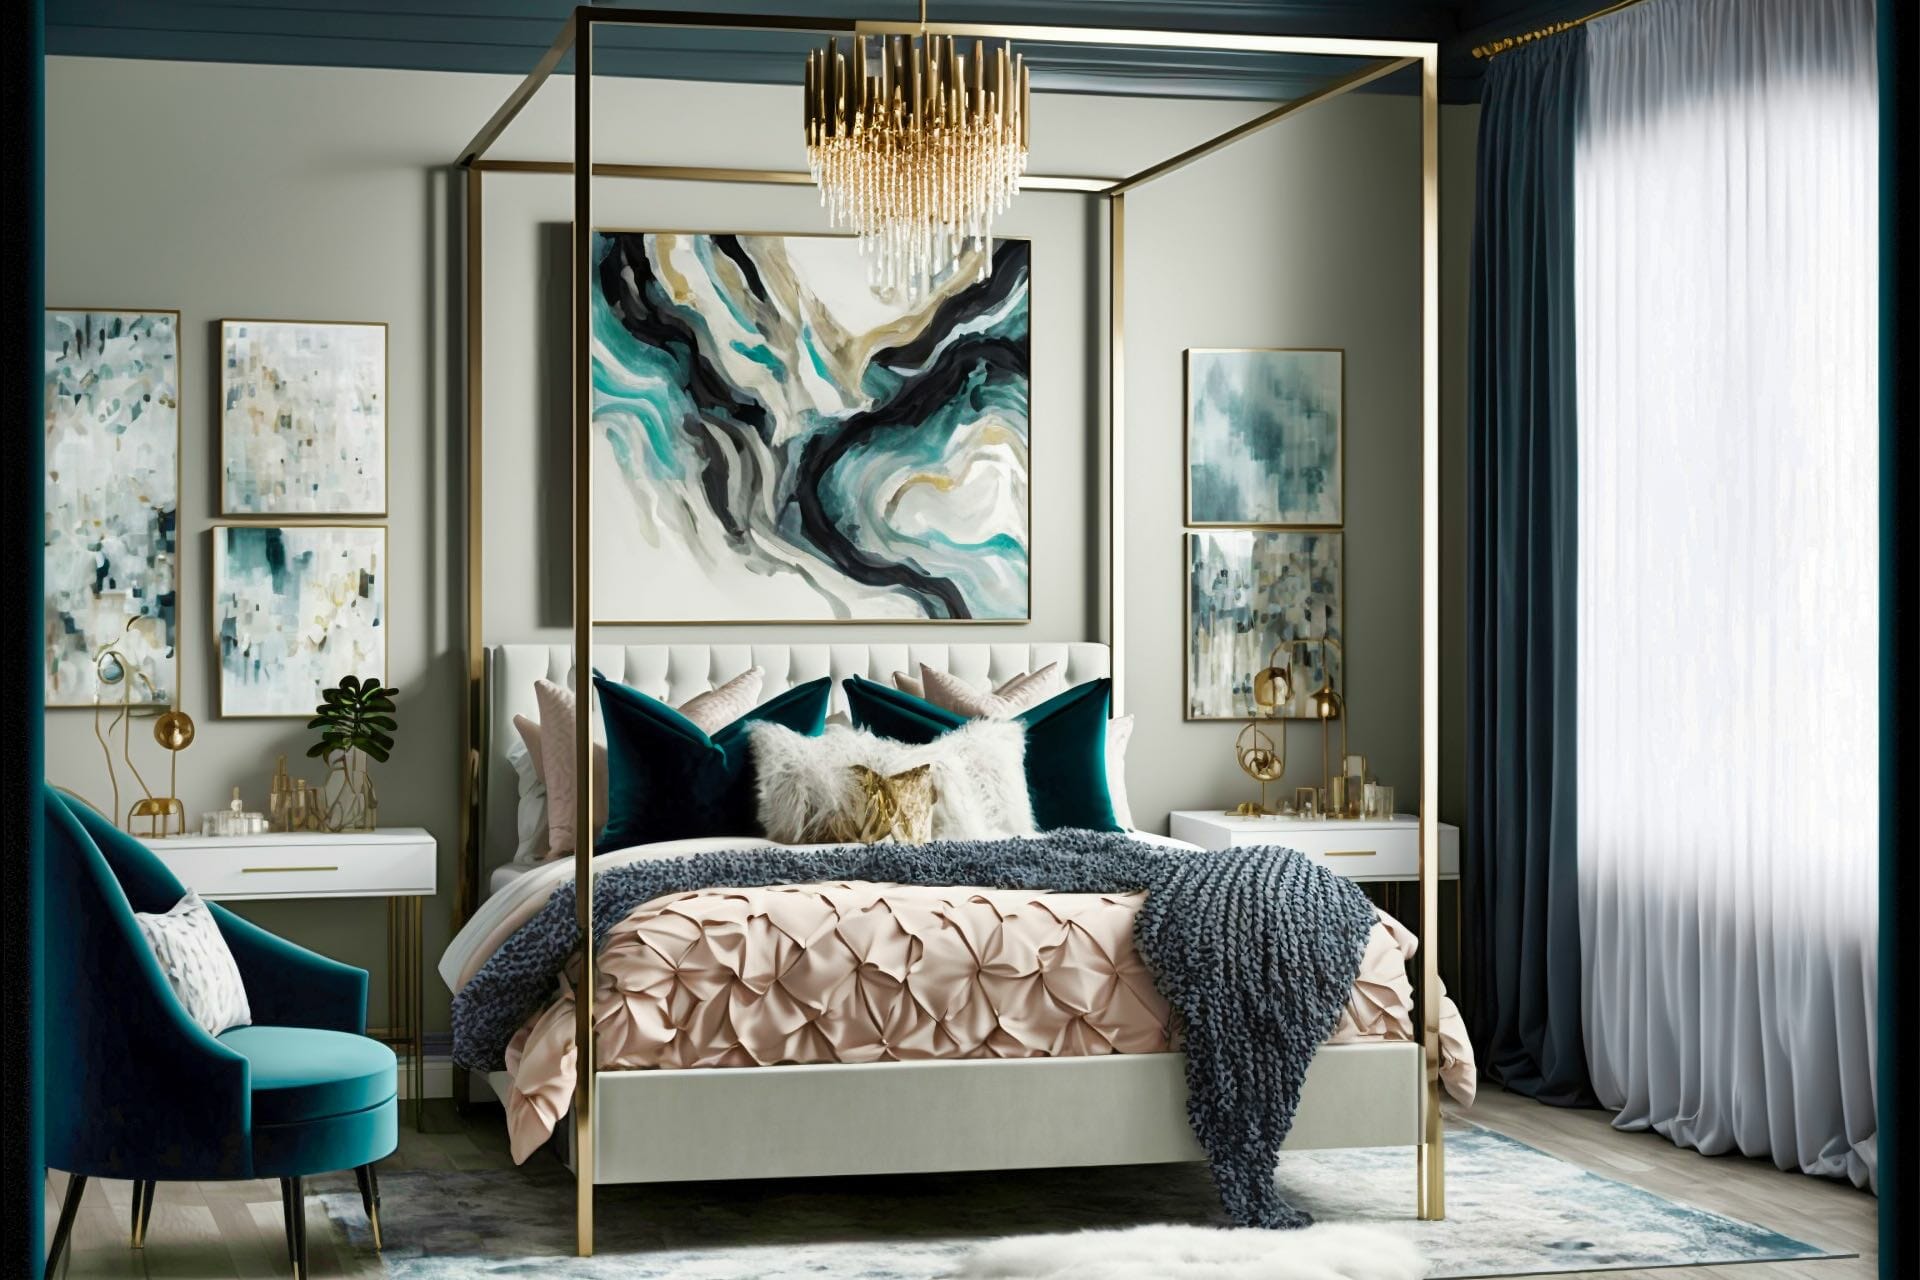 Luxurious Glamourous Modern Bedroom Upscale